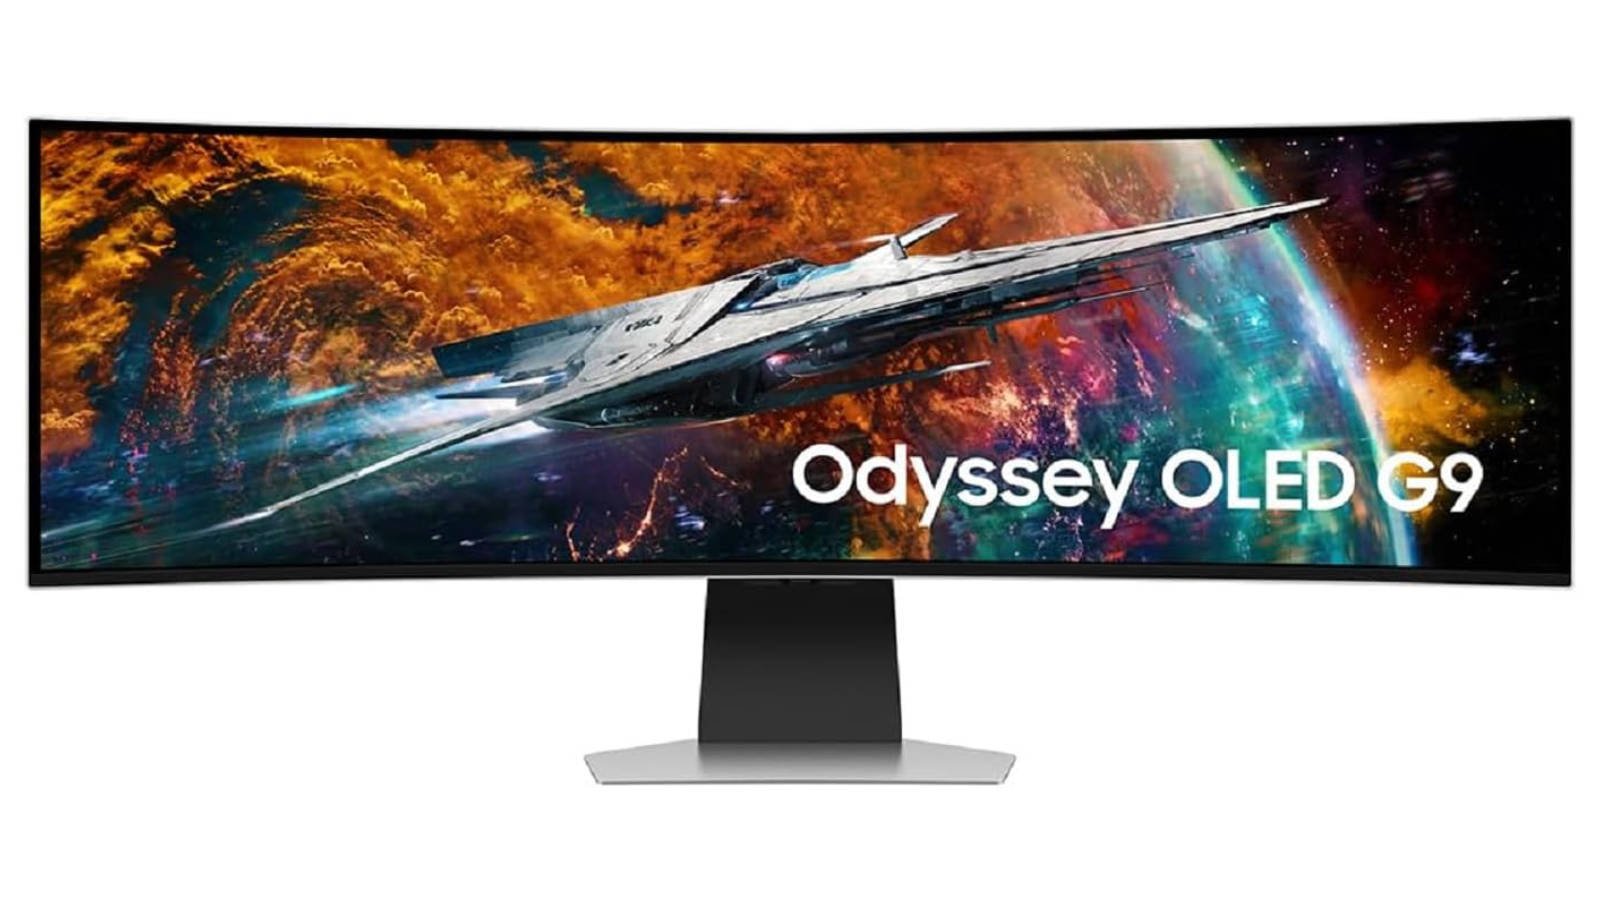 Samsung Odyssey OLED G9 gaming monitor against a white background.